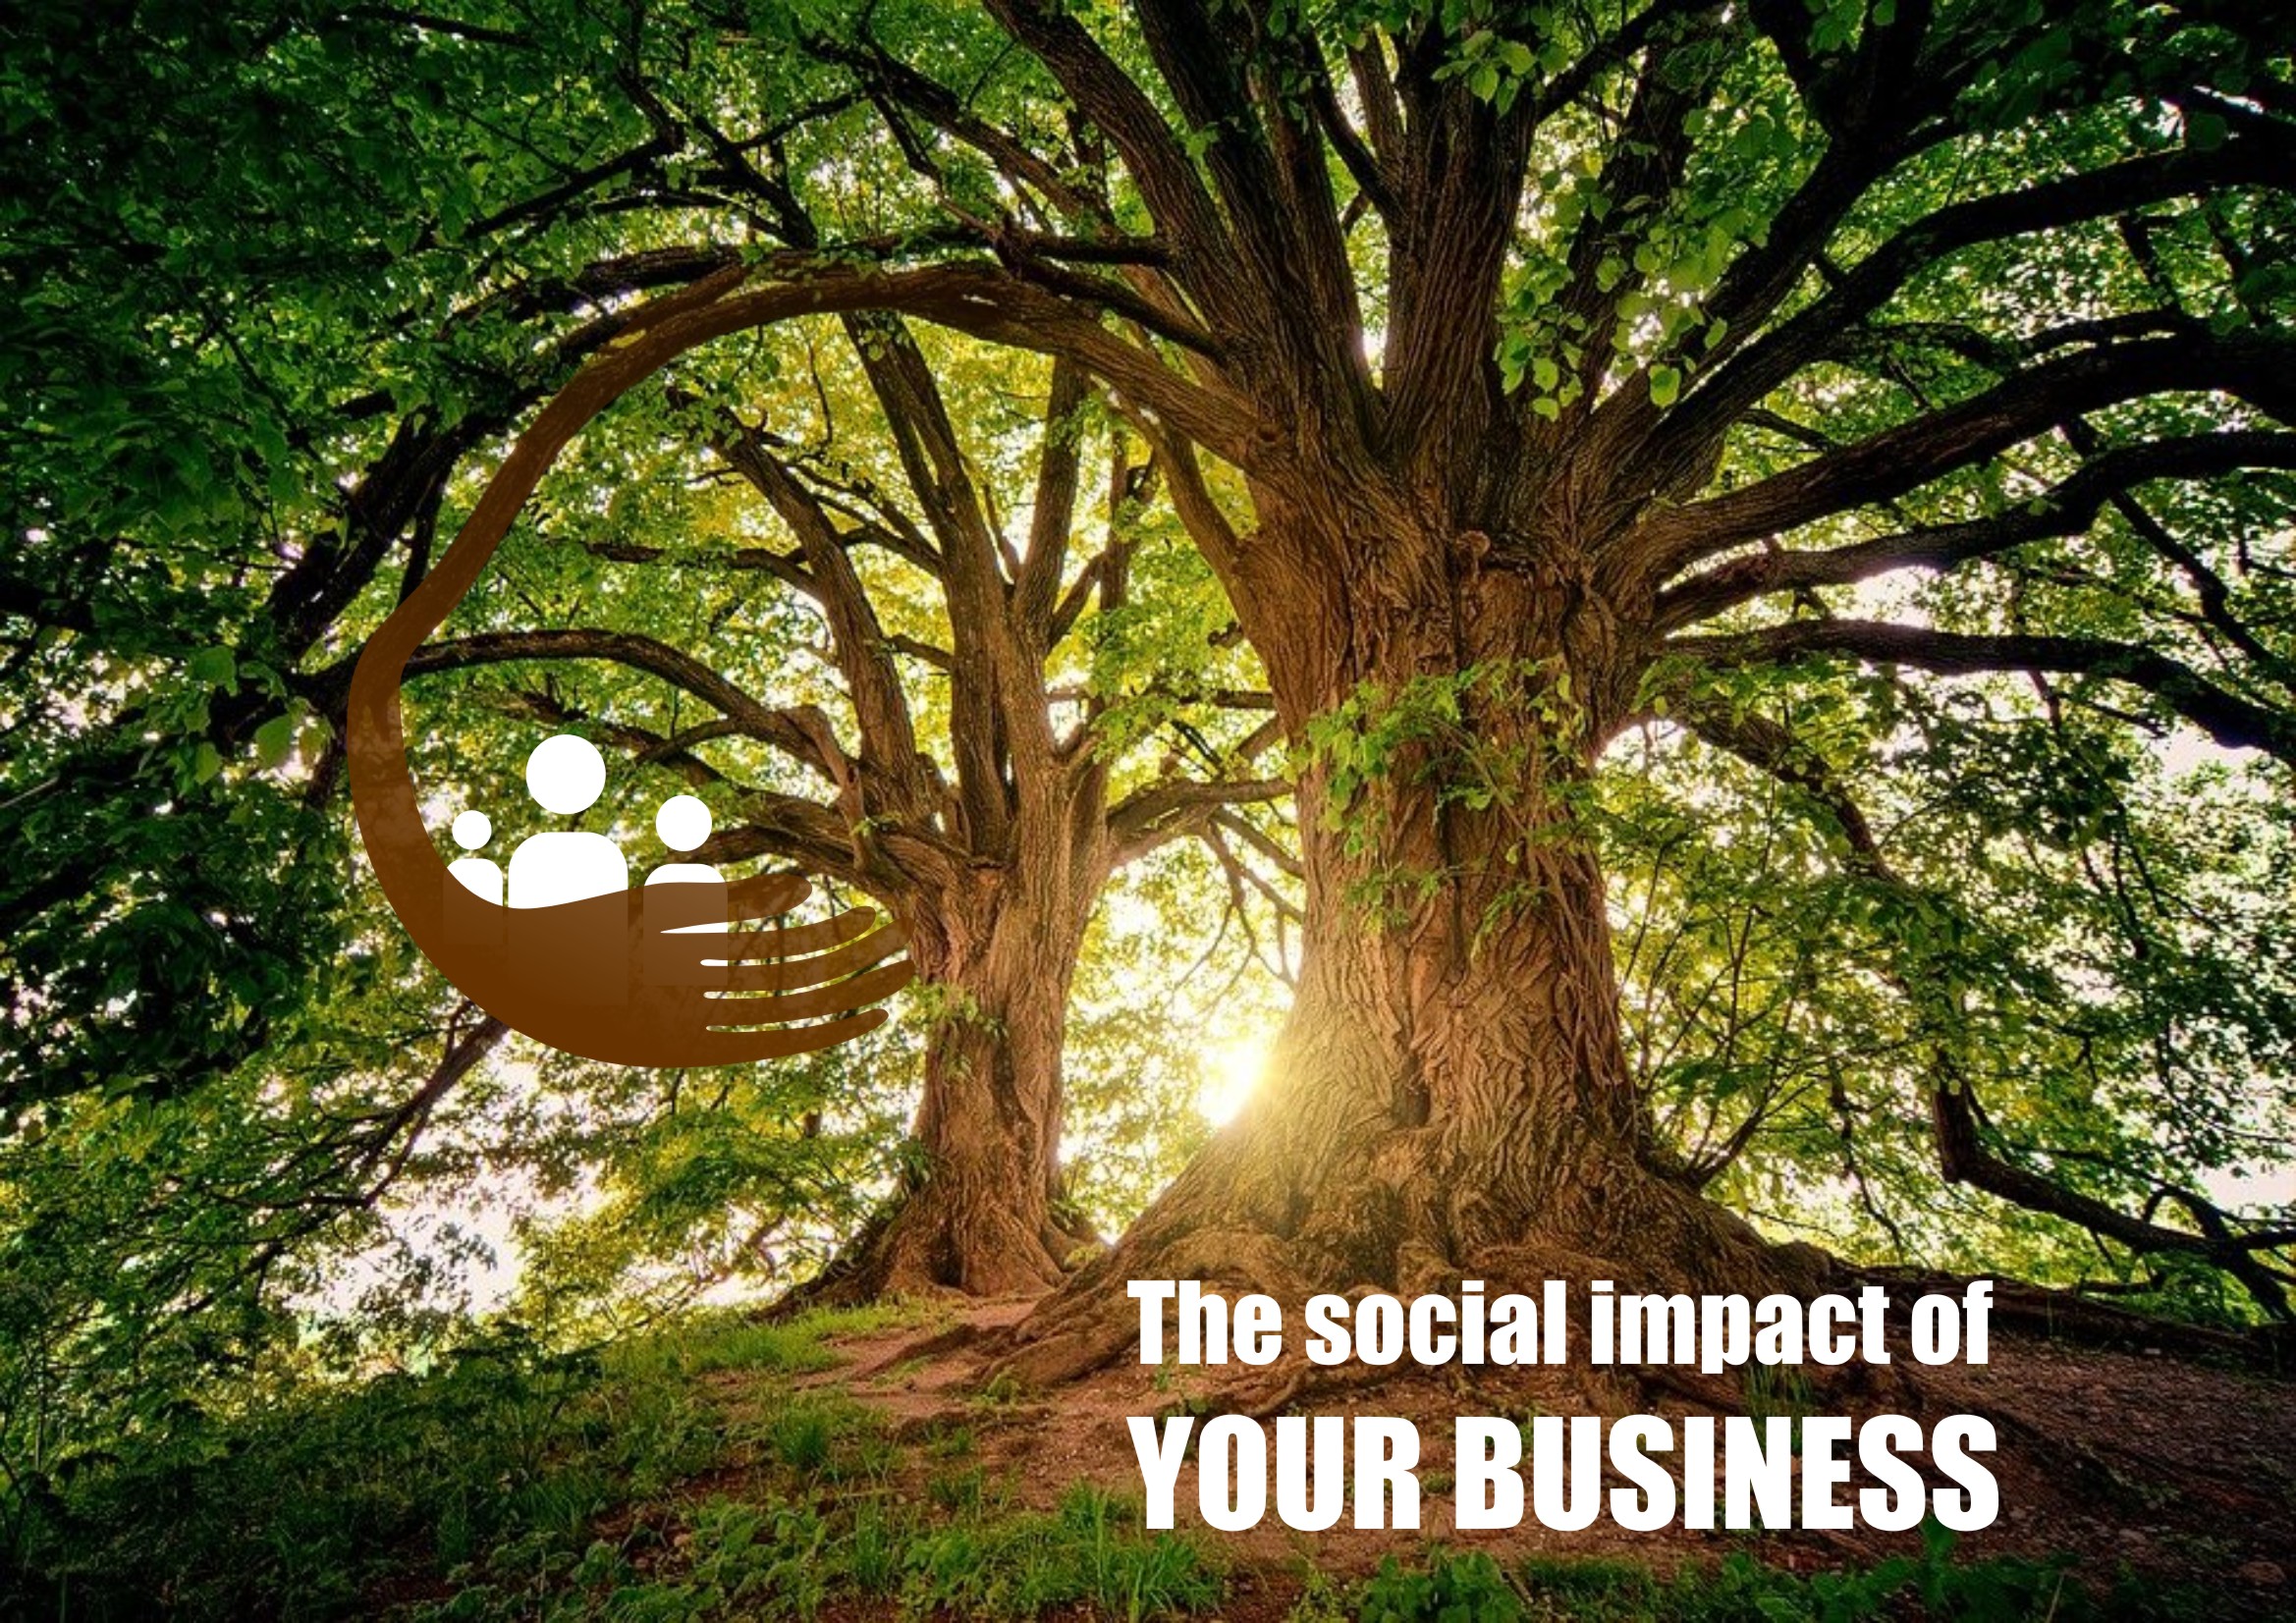 The social impact of your business